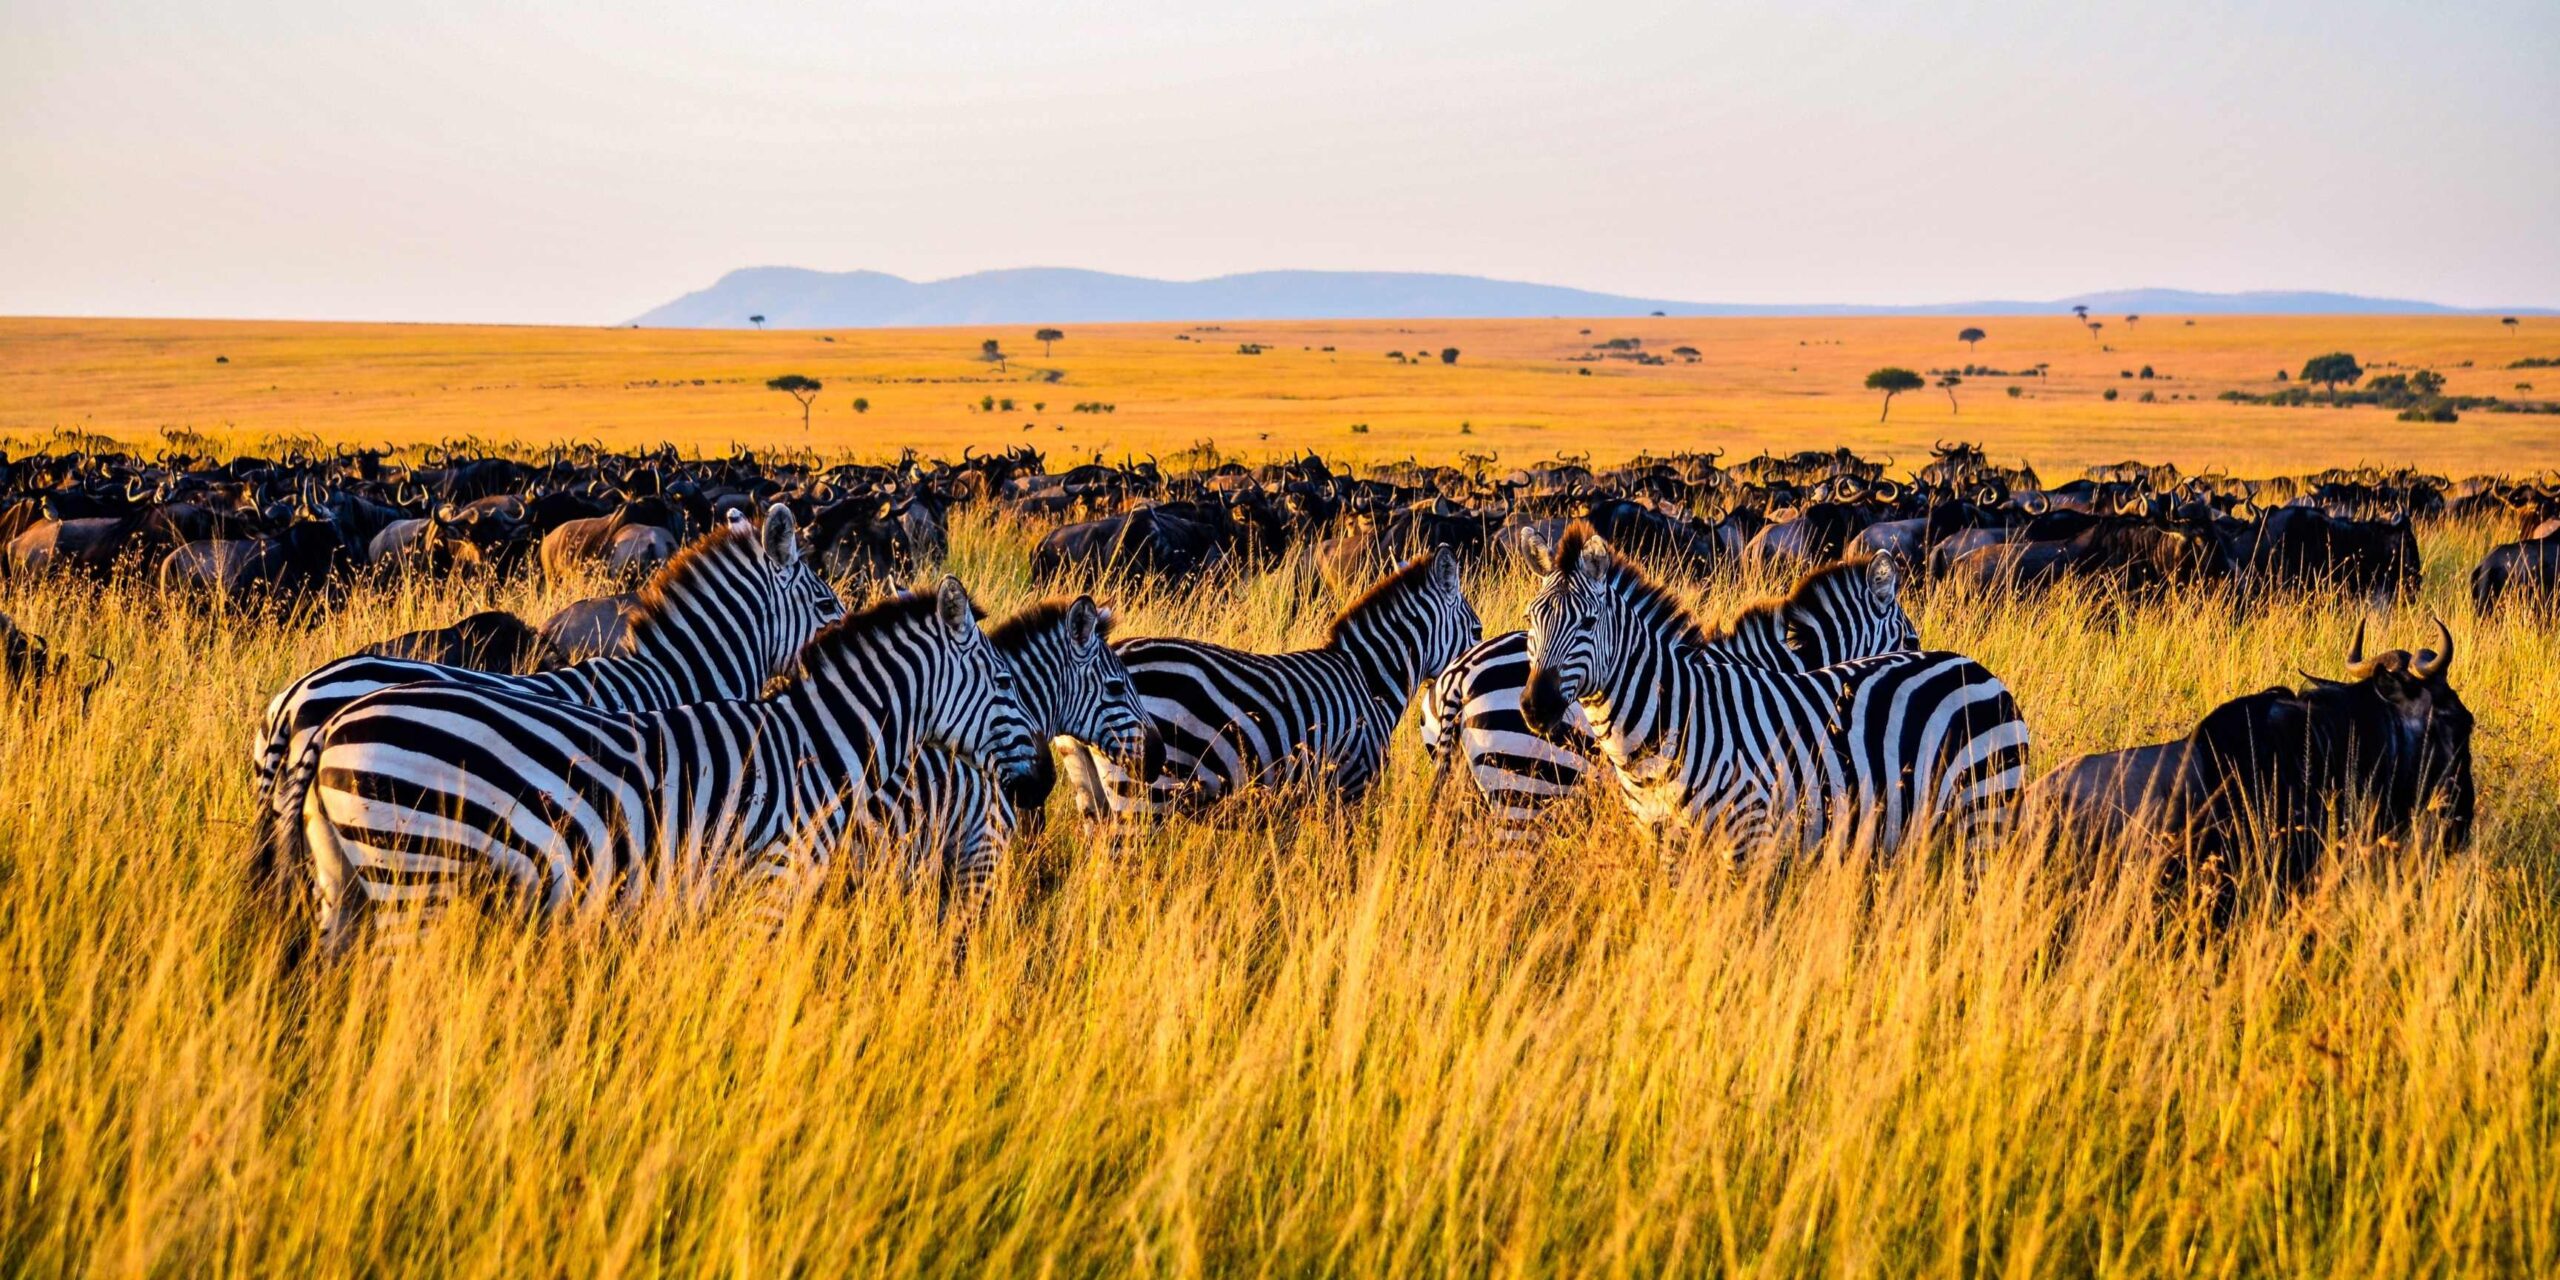 Best Virtual Safari For Kids - Visit Africa Without Leaving Home!